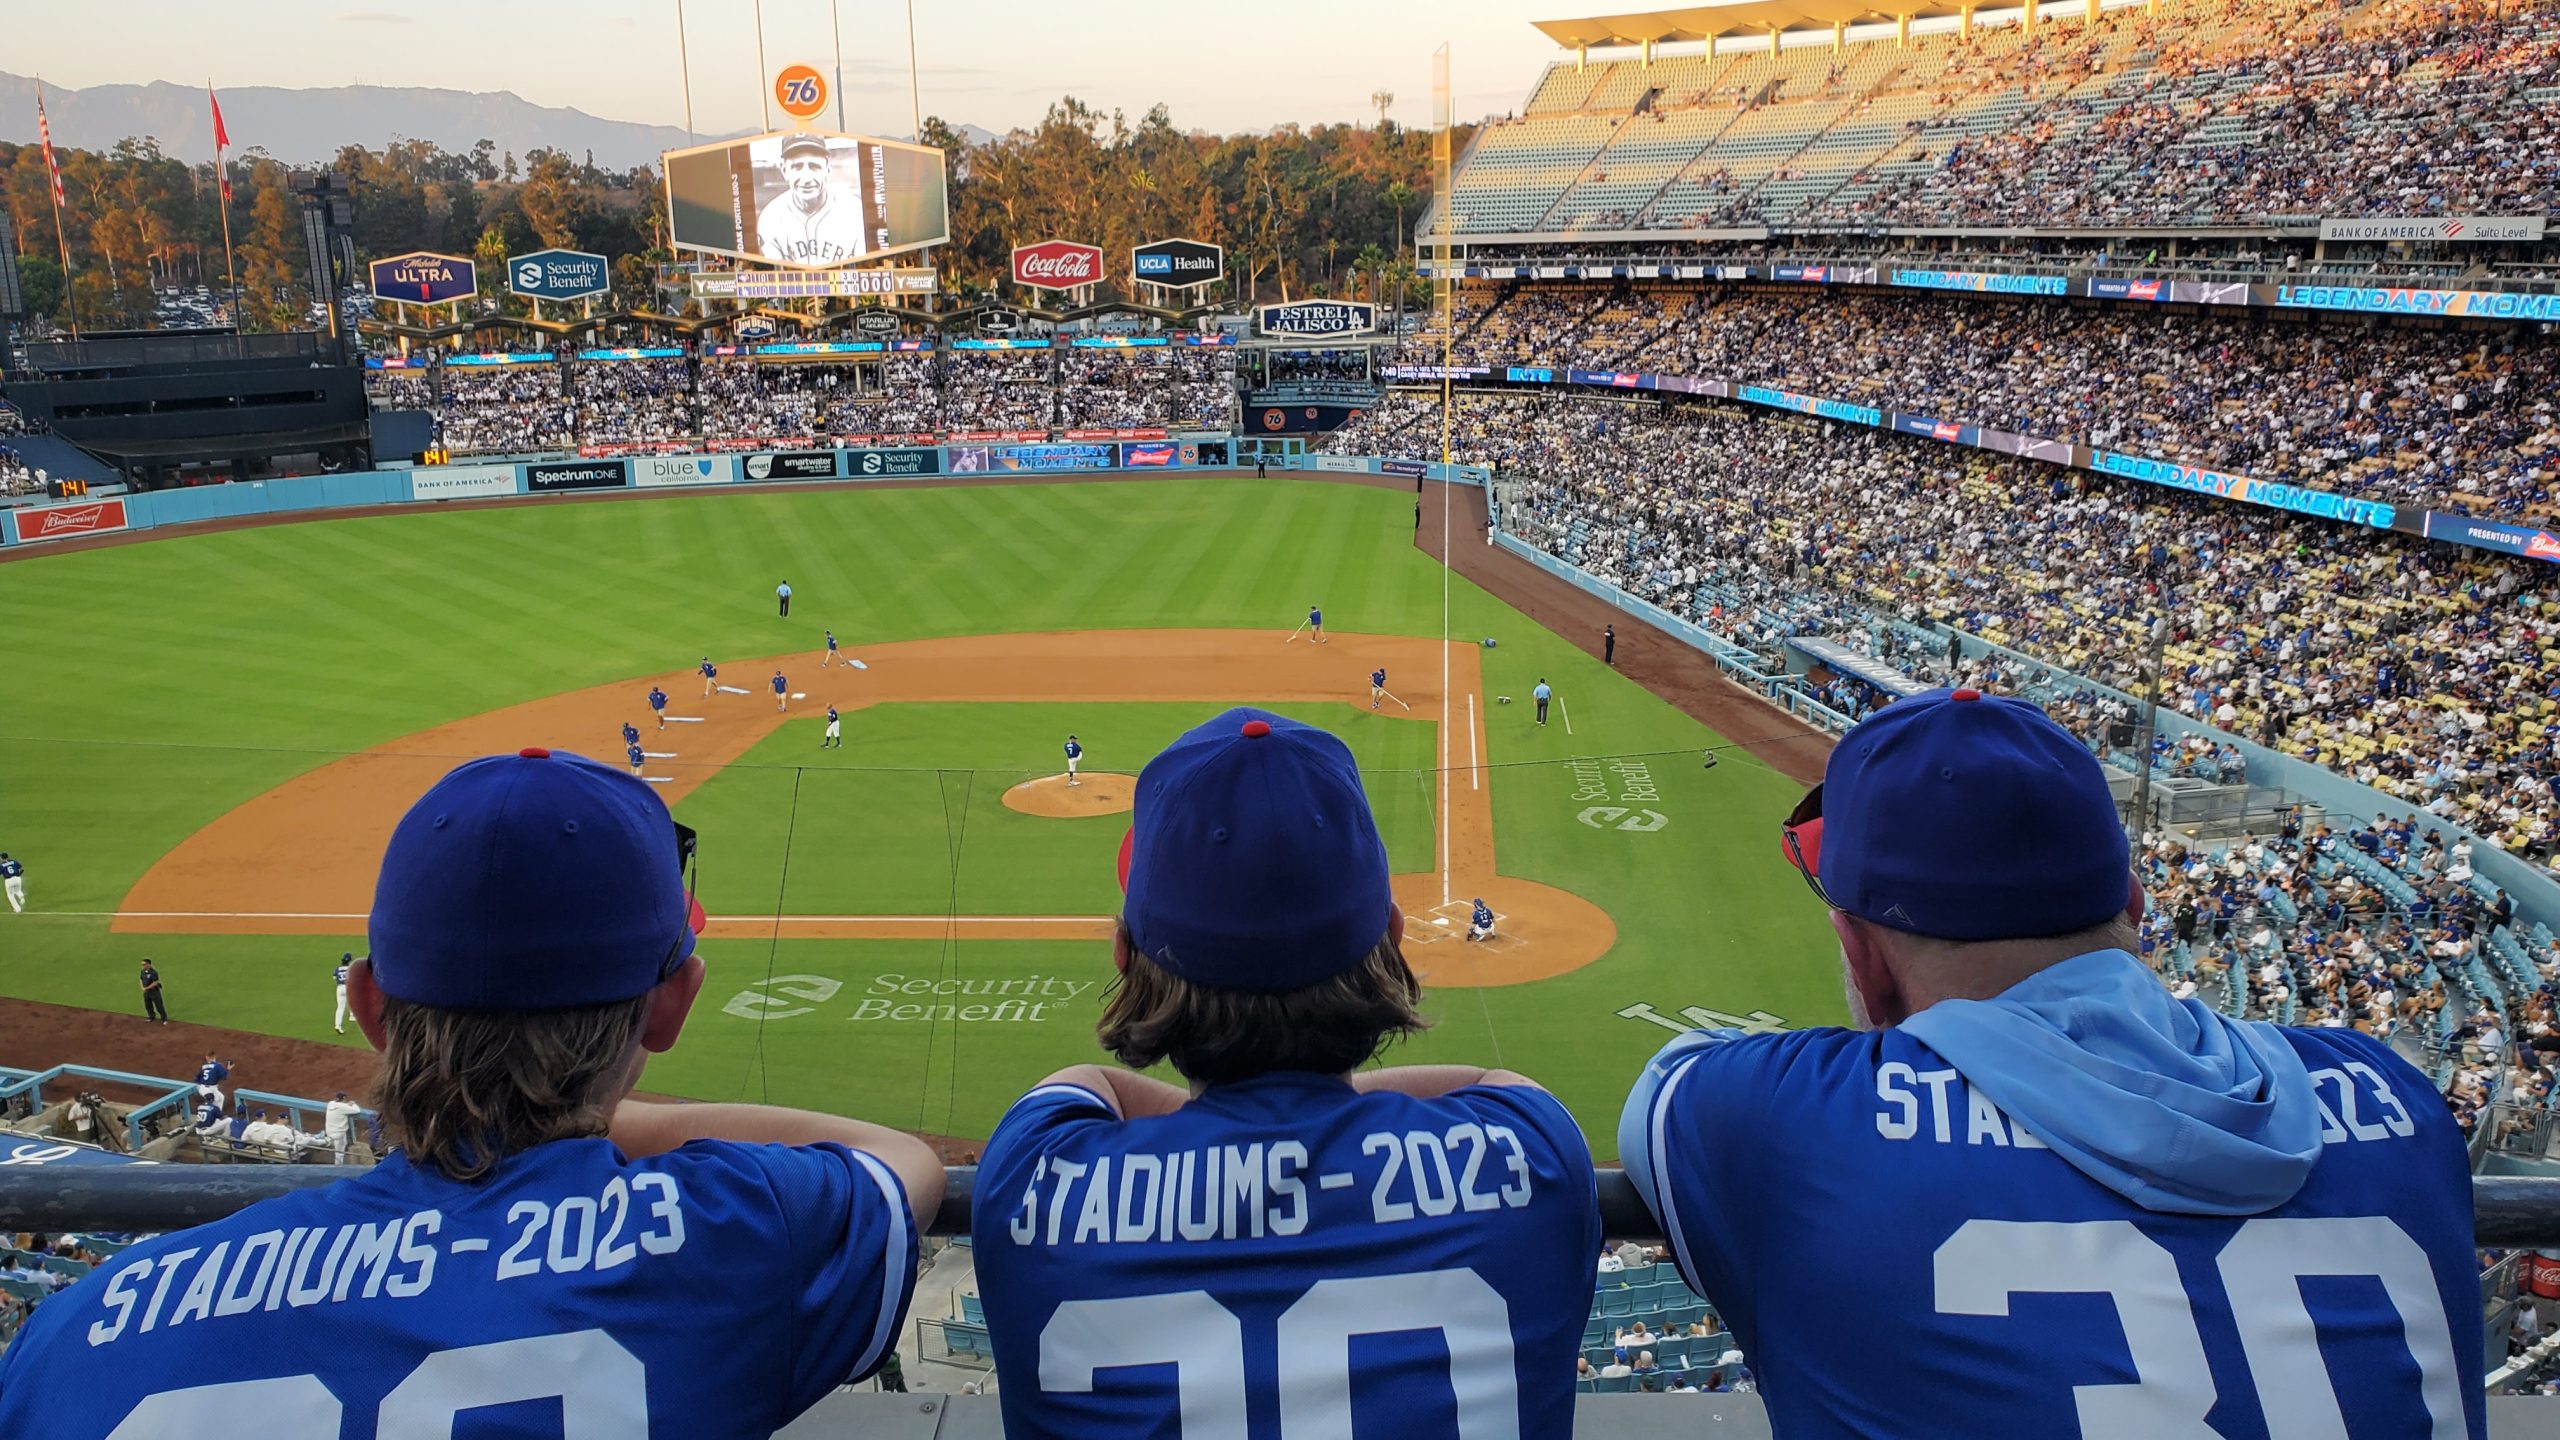 Photograph of the backs of Ryan, Heather and Brad at Dodger Stadium, wearing jerseys that say "Stadiums - 2023: 30" and looking down over the baseball diamond.